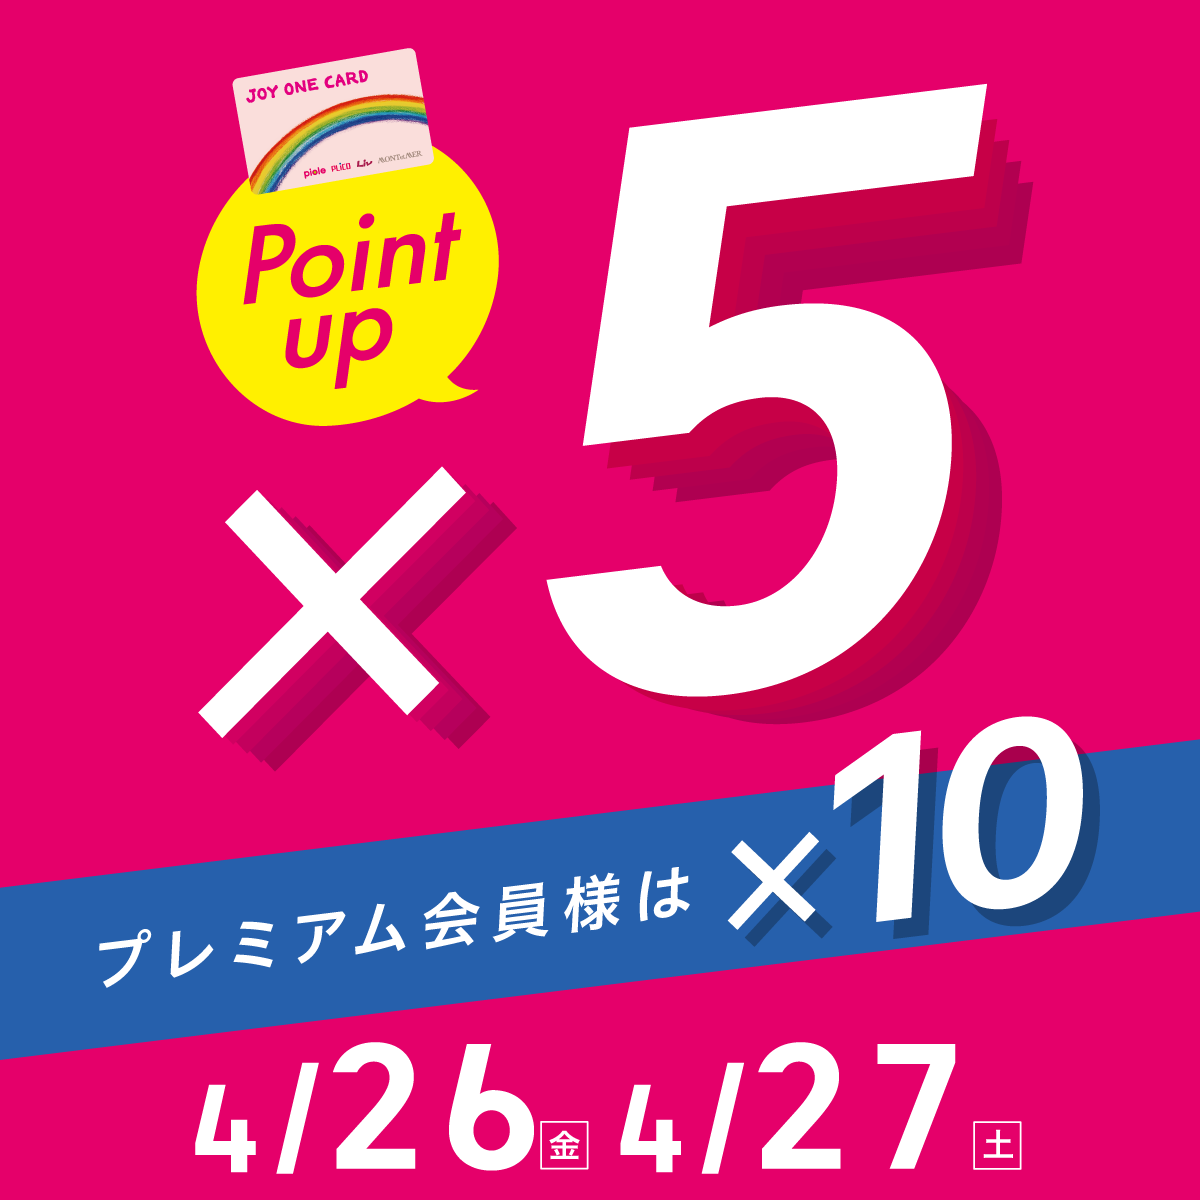 4/26~4/27 Point up×5 プレミアム会員様は×10